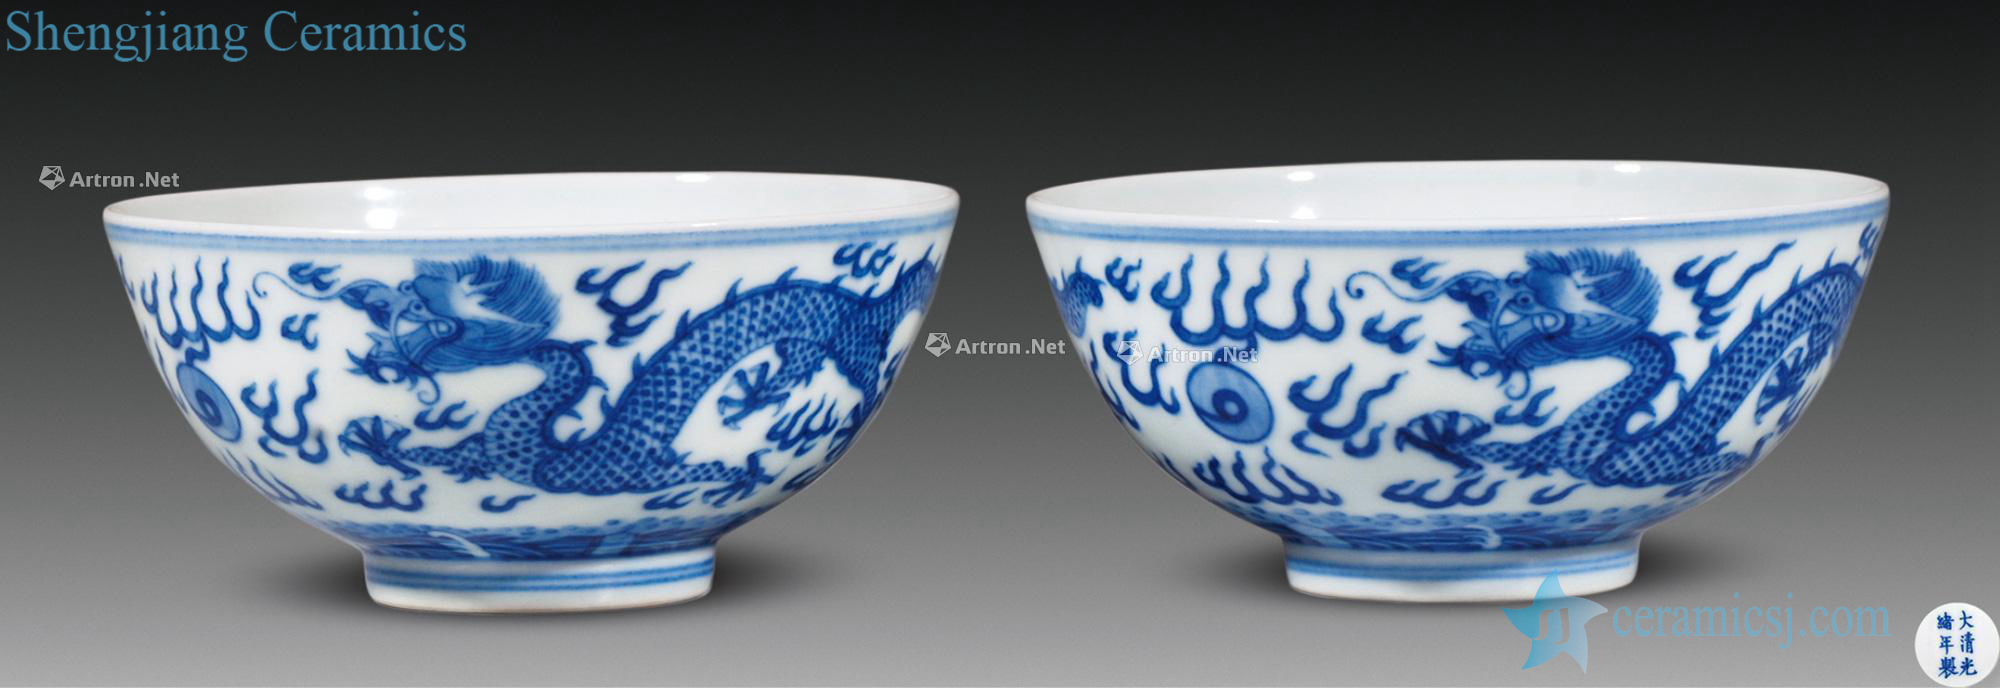 Qing guangxu Blue and white cast pearl dragon bowl (a)